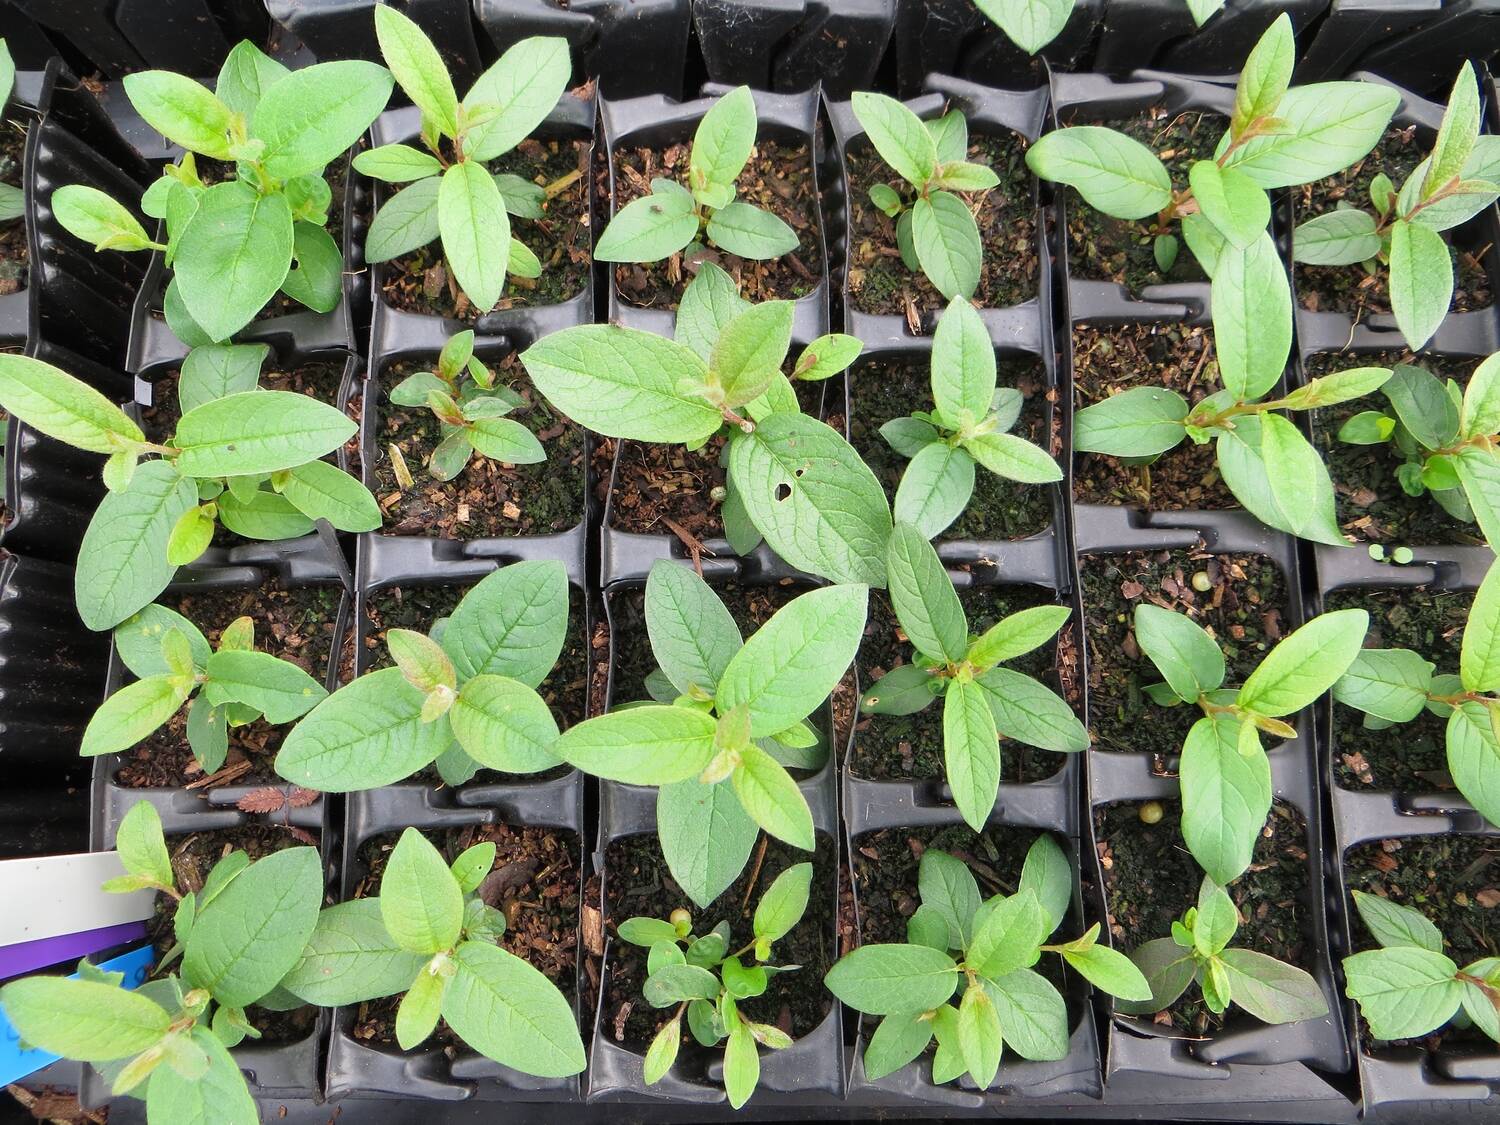 A tray of individually potted willow seedlings.